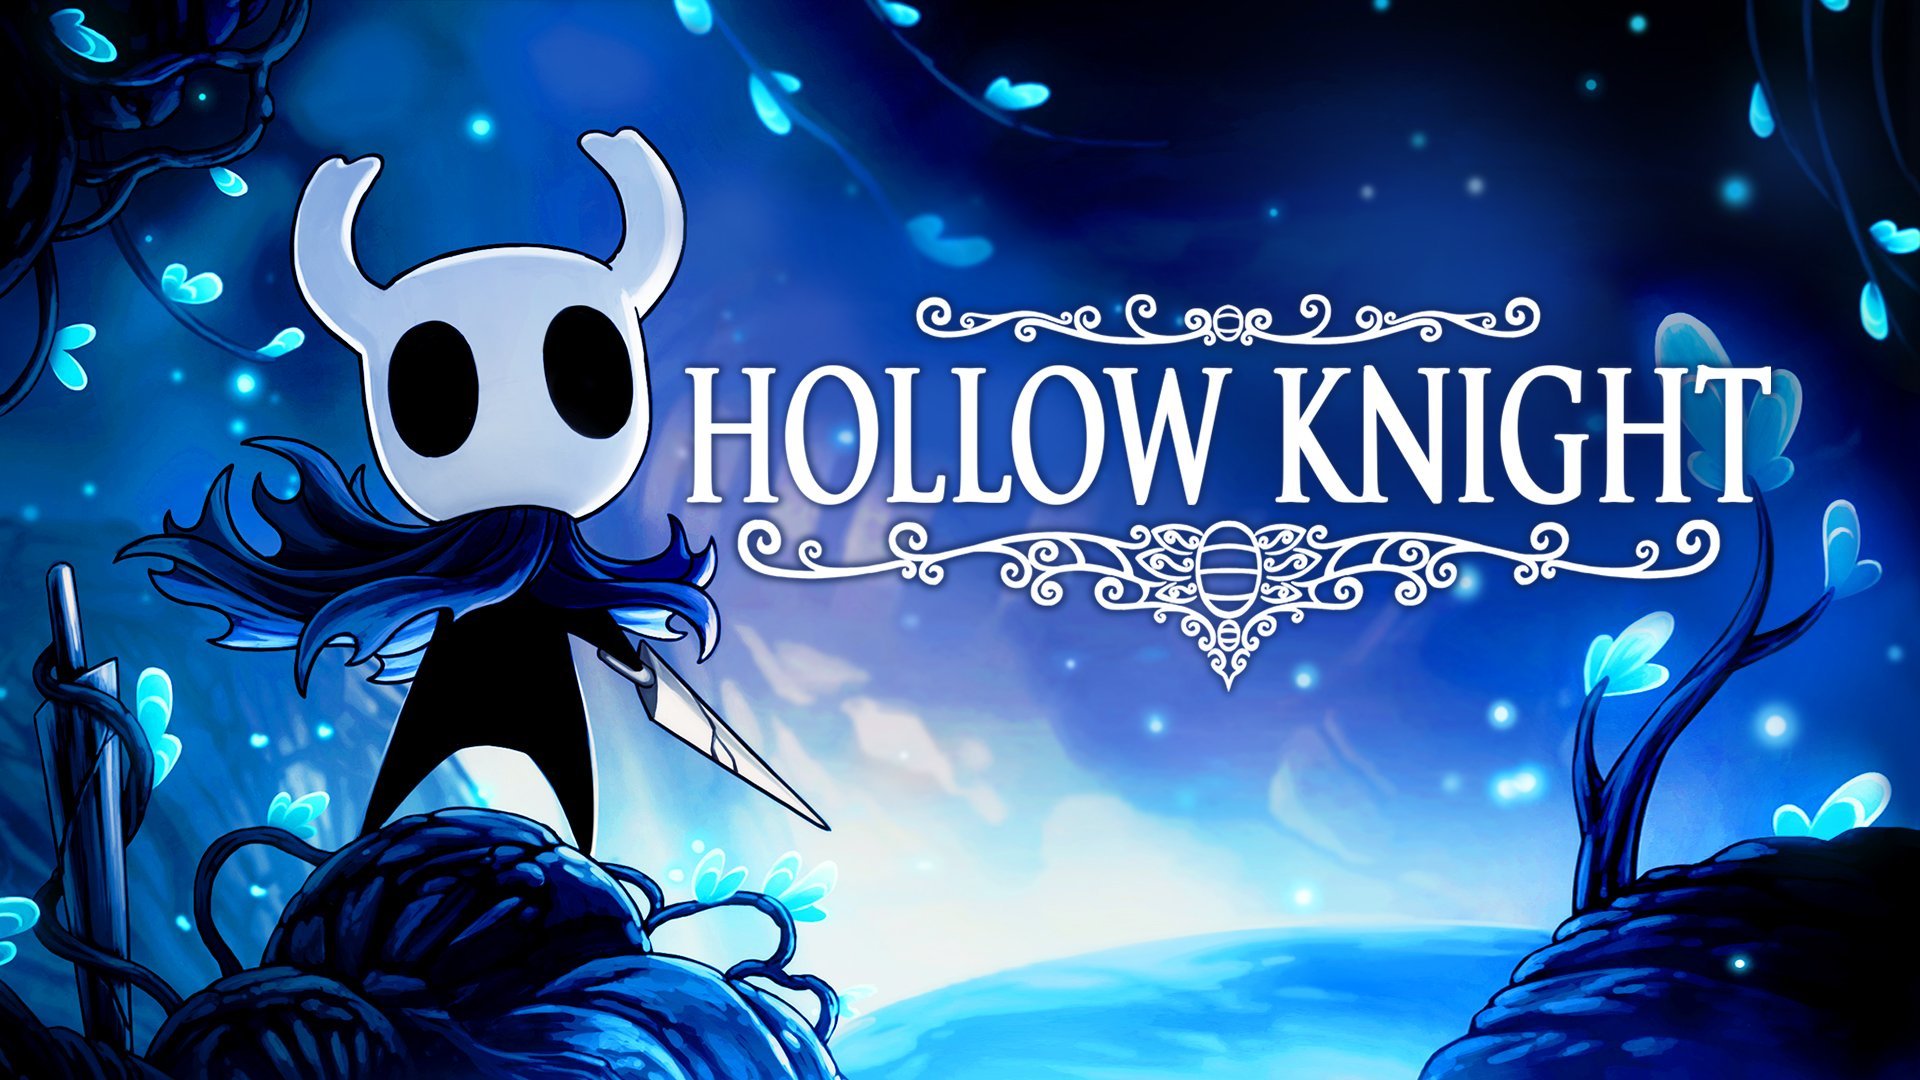 Hollow Knight: Voidheart Edition - Metacritic